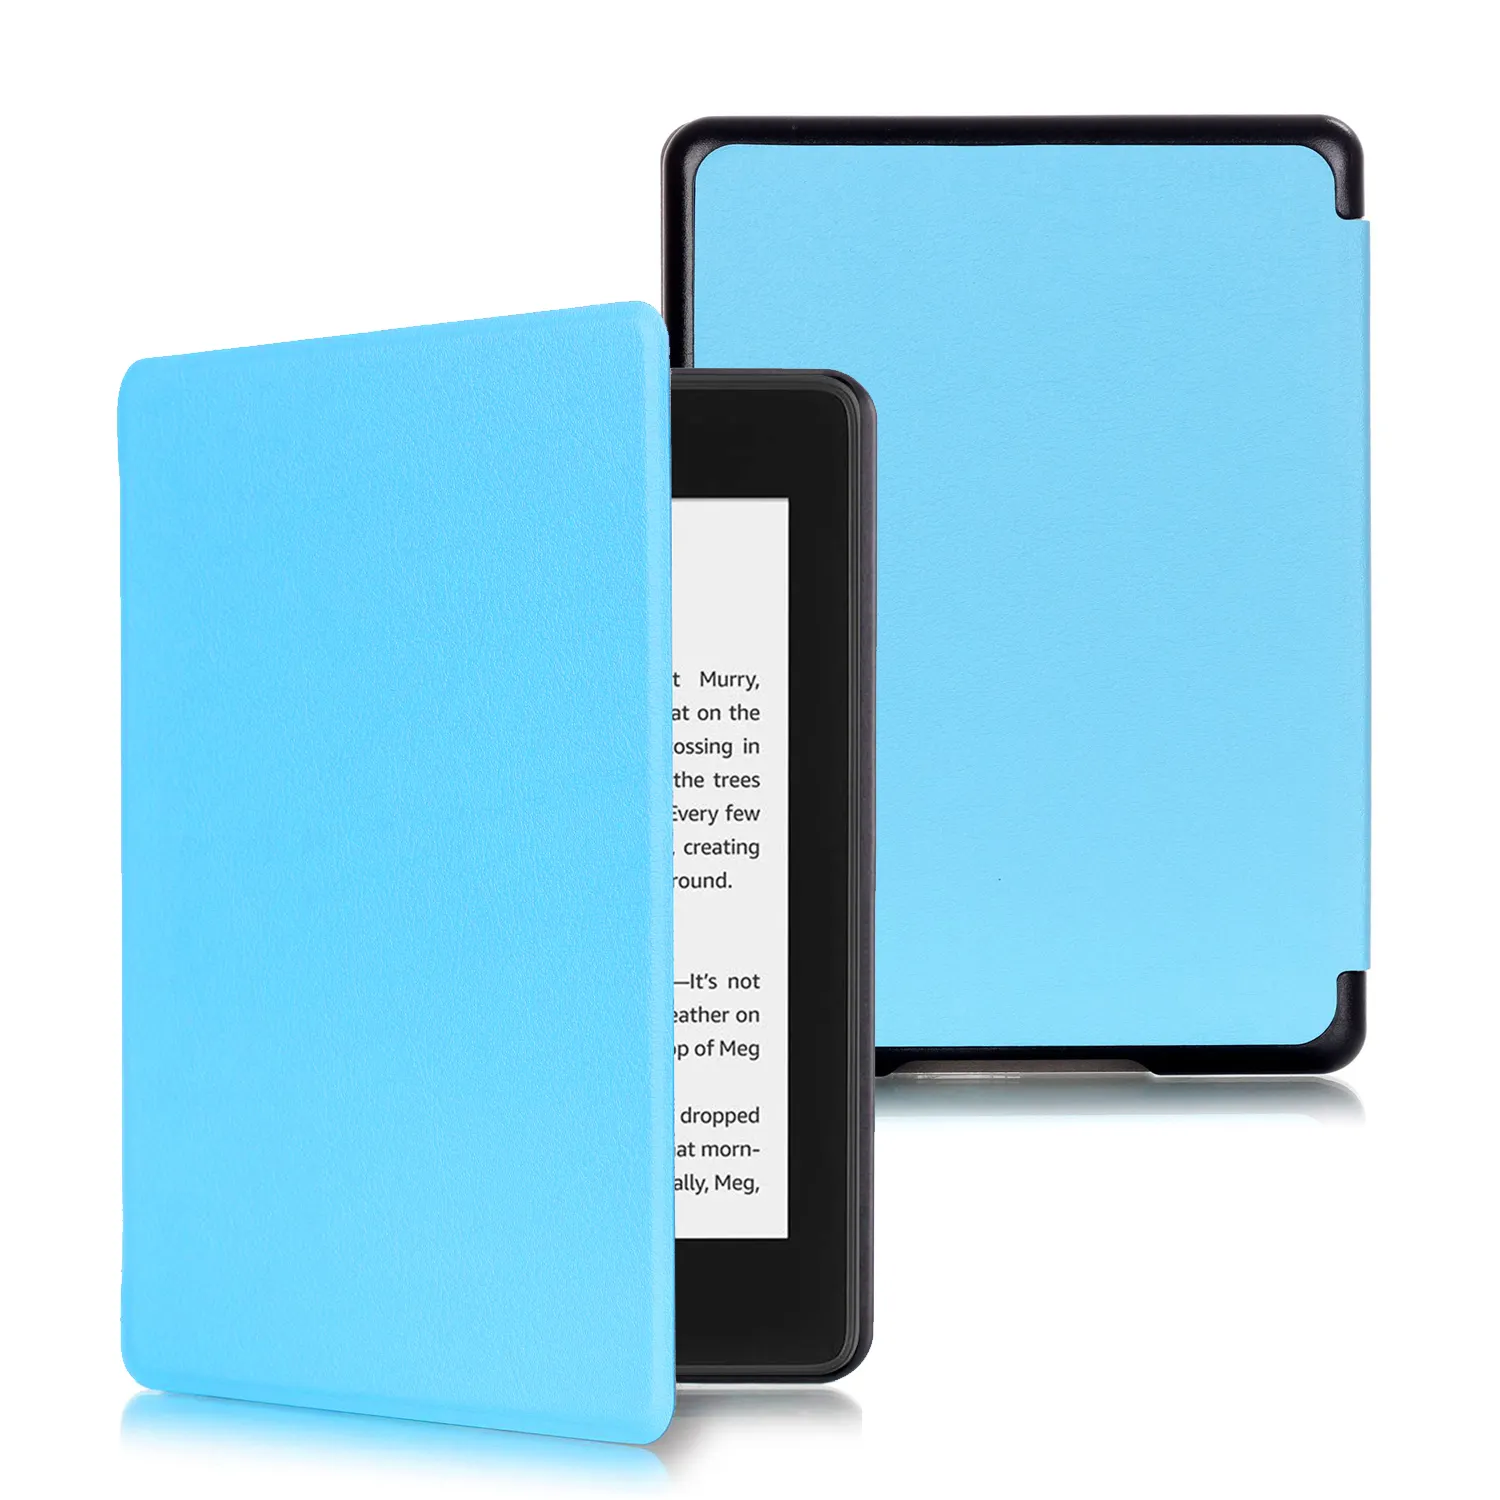 NET-CASE Slim Case for Kindle Paperwhite 2018 version E-Reader Cover OEM Kindle Paperwhite 4 10th Generation